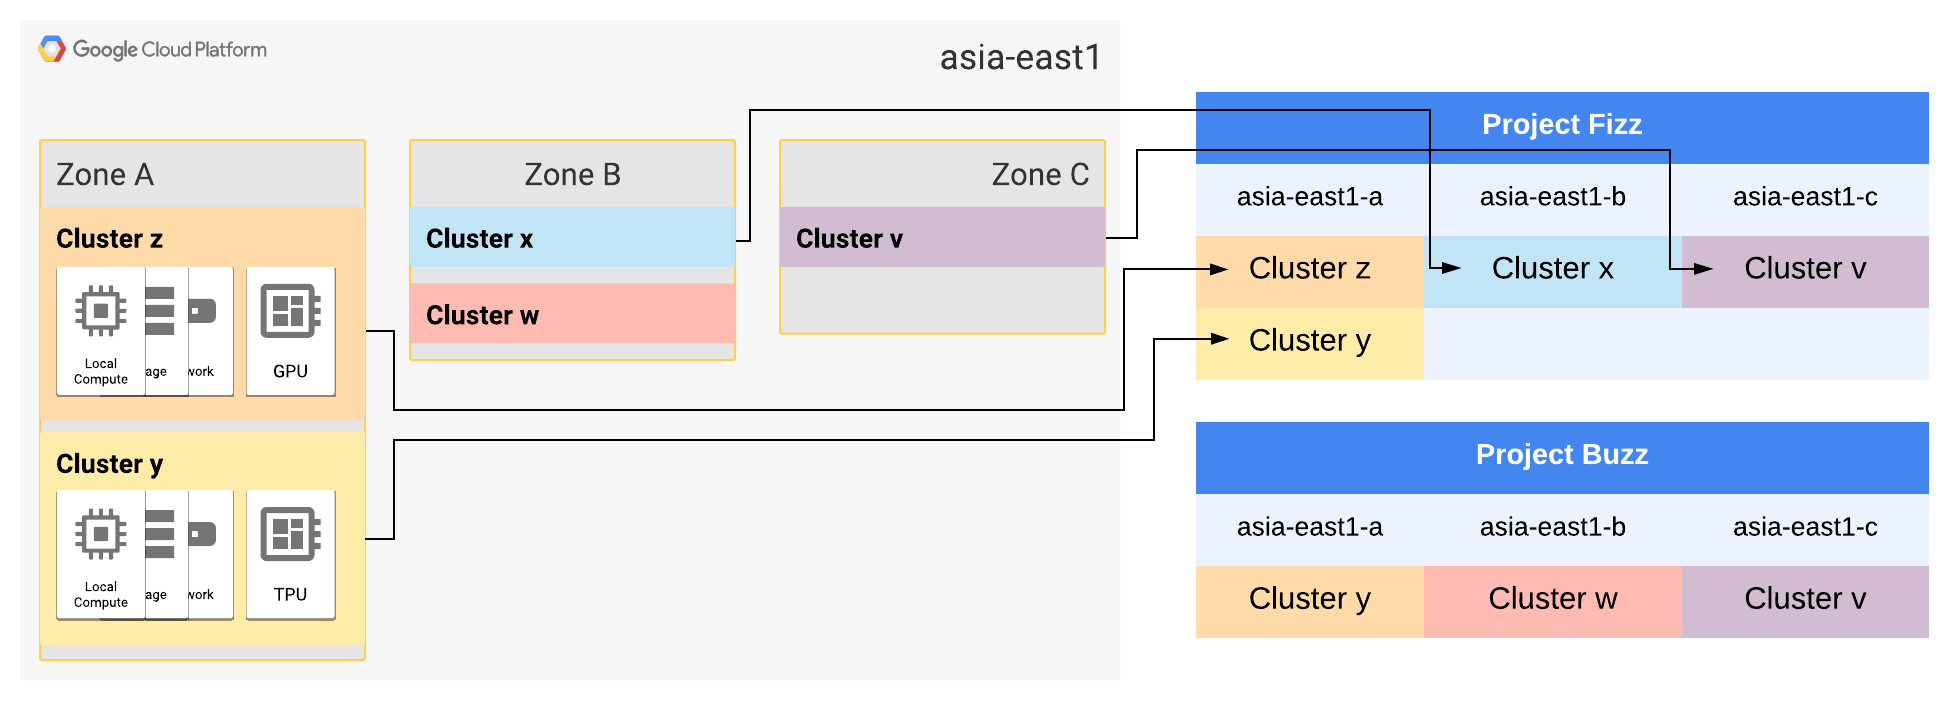 asia-east1 zones A and B have each expanded to two clusters.